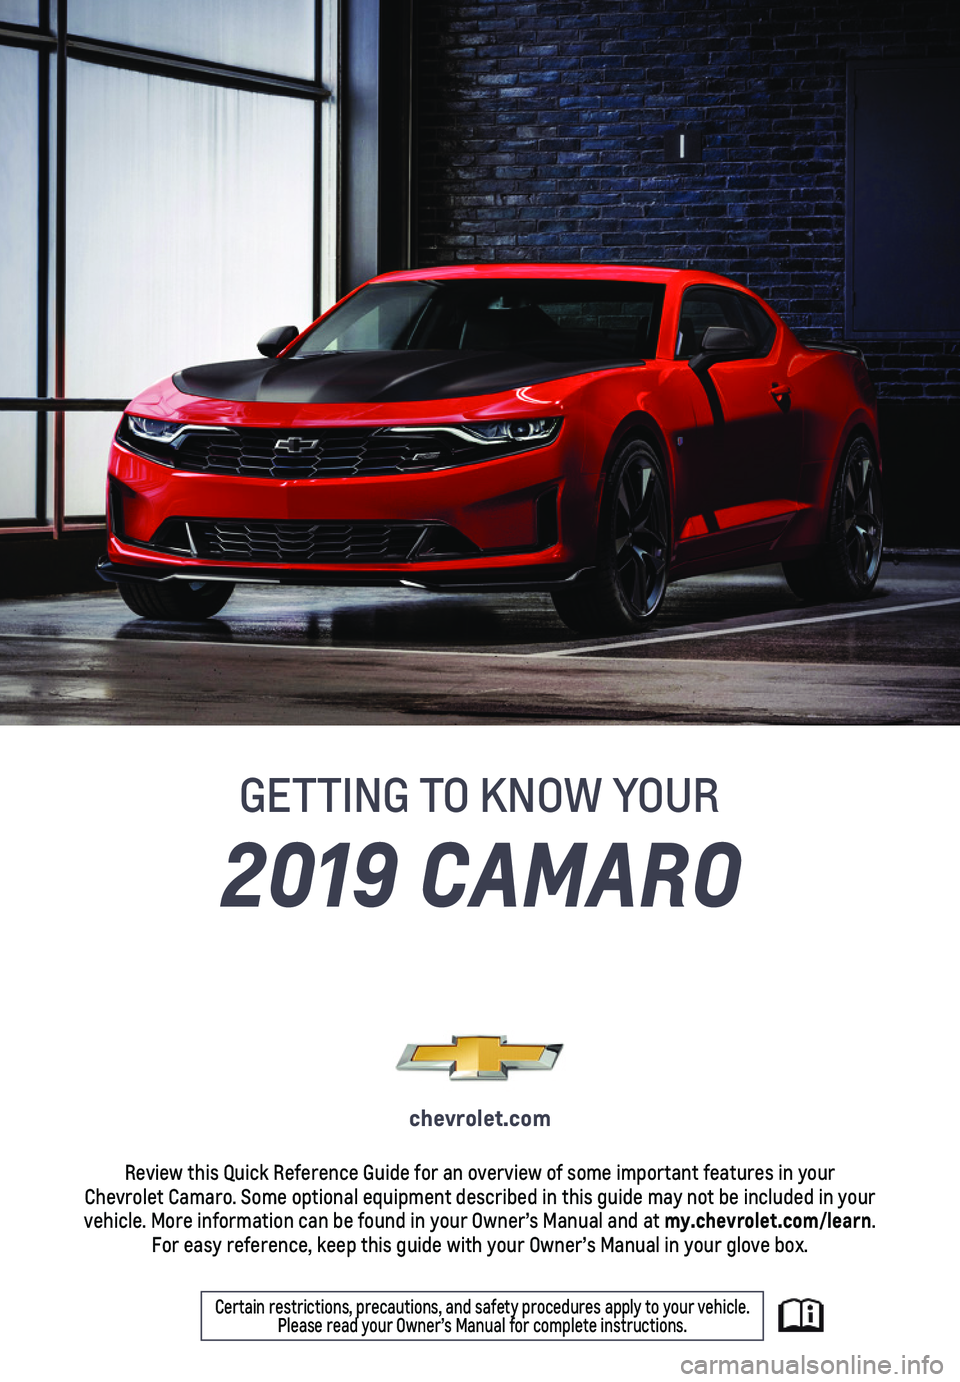 CHEVROLET CAMARO 2019  Get To Know Guide 2019 CAMARO
GETTING TO KNOW YOUR
chevrolet.com
Review this Quick Reference Guide for an overview of some important feat\
ures in your  Chevrolet Camaro. Some optional equipment described in this guide